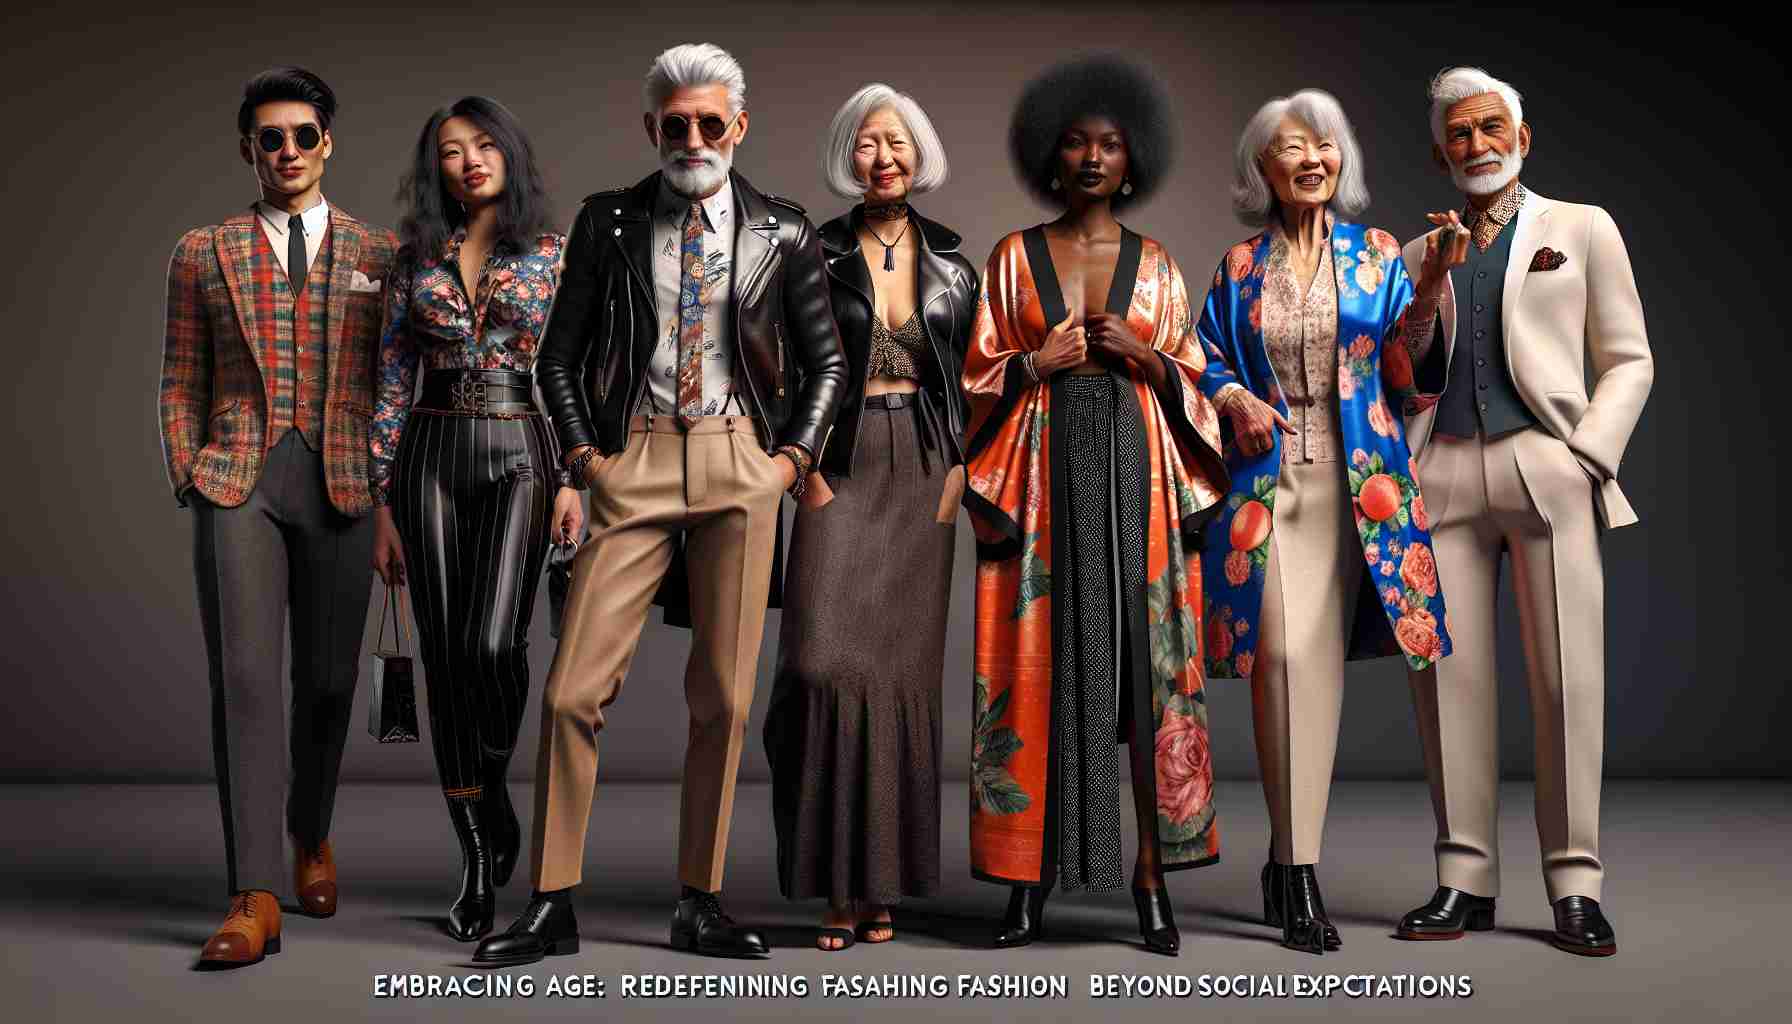 Realistic high definition image illustrating the concept of 'Embracing Age: Redefining Fashion Beyond Social Expectations'. Picture showcasing older individuals of various descents, both men and women, each flaunting their unique style. They project their style, charisma, and confidence. Let these individuals be East Asian man with a voguish leather jacket over a retro shirt, Middle-Eastern woman in an elegant chic dress, Hispanic man in a dapper suit, Caucasian woman with a colorfully bold print Kimono, Black woman with a trendy two-piece silk suit, and South Asian man with a vintage-inspired classic vest and trousers ensemble. They all express their own ultimate, unique style that totally shatters stereotypical expectations. The image should portray their age as an added charm to their charisma, not as a barrier.